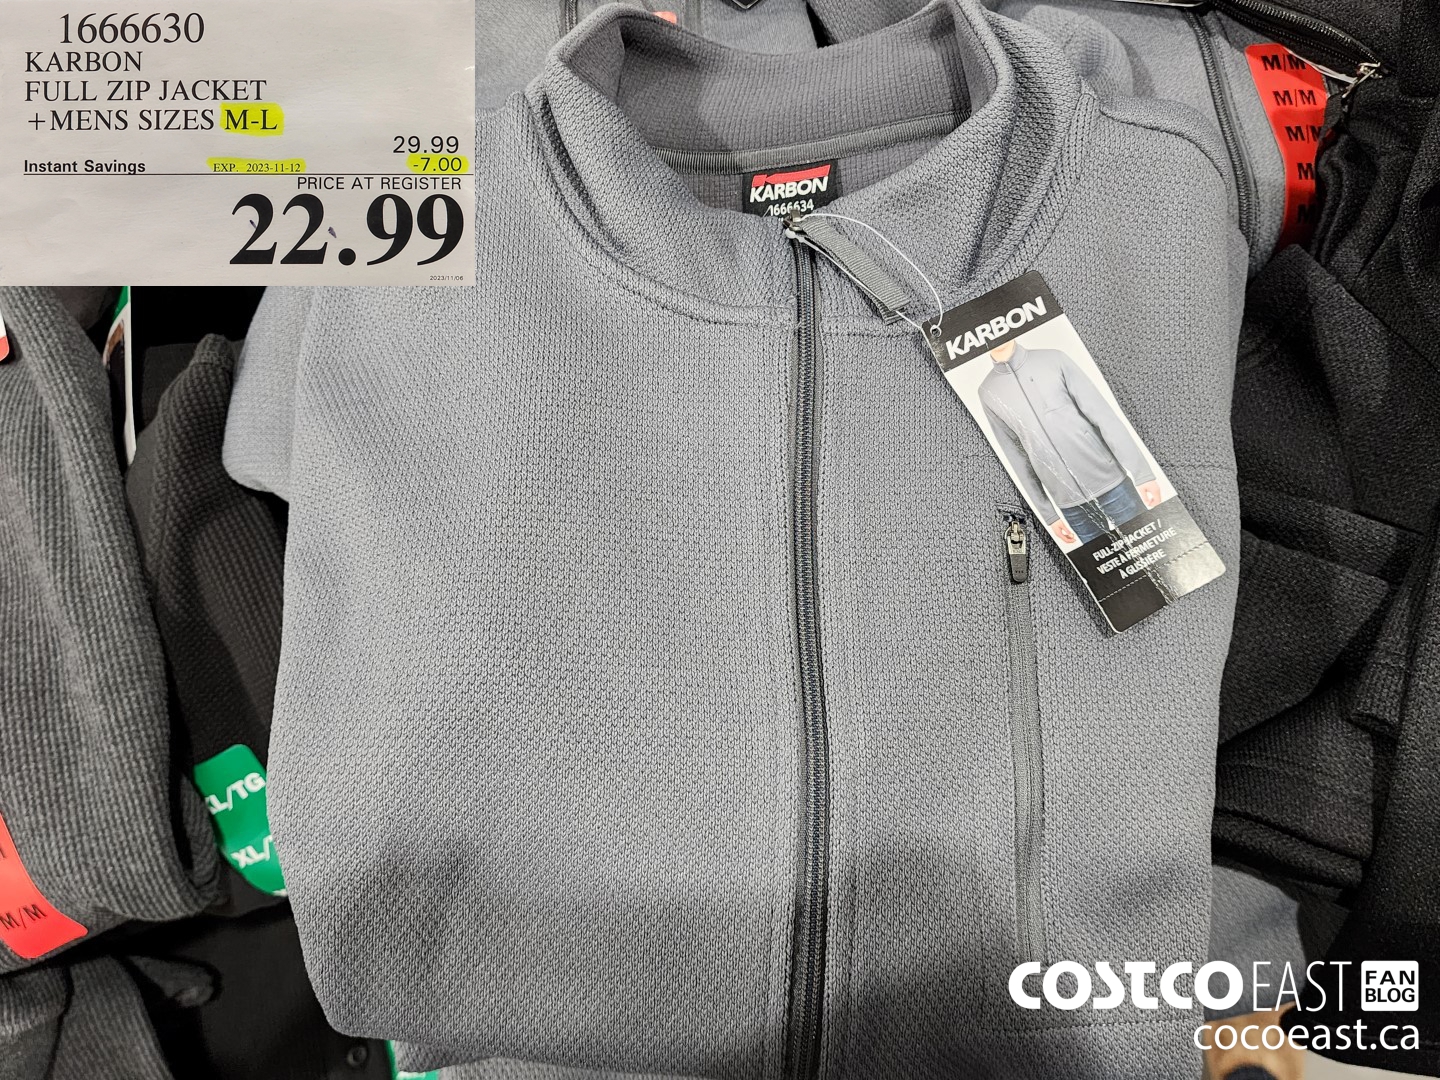 Costco Fall Clothing 2019 Superpost! Clothing & Jackets - Costco West Fan  Blog